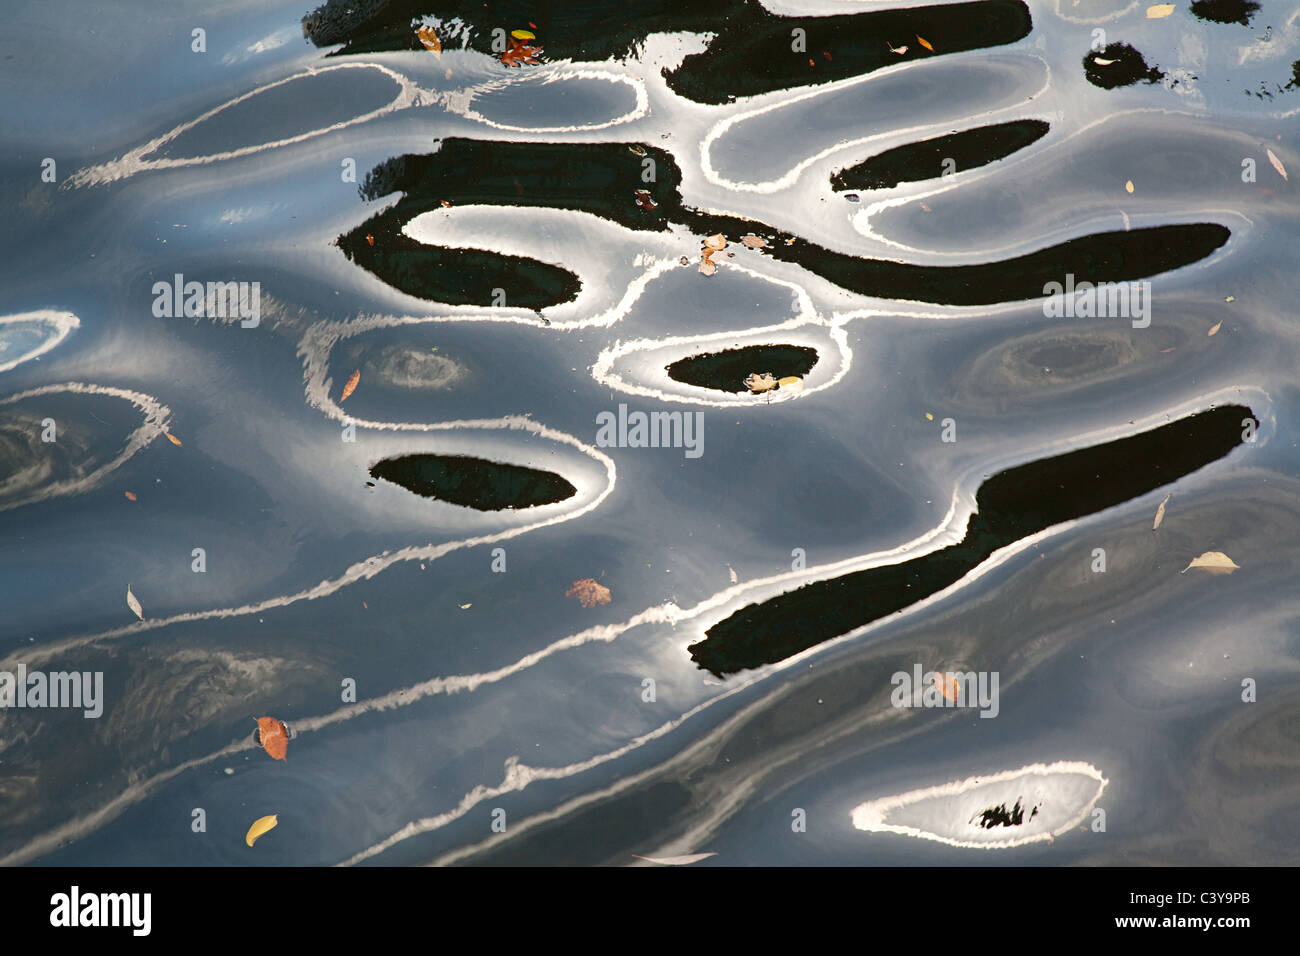 Ripples and reflections on water surface Stock Photo